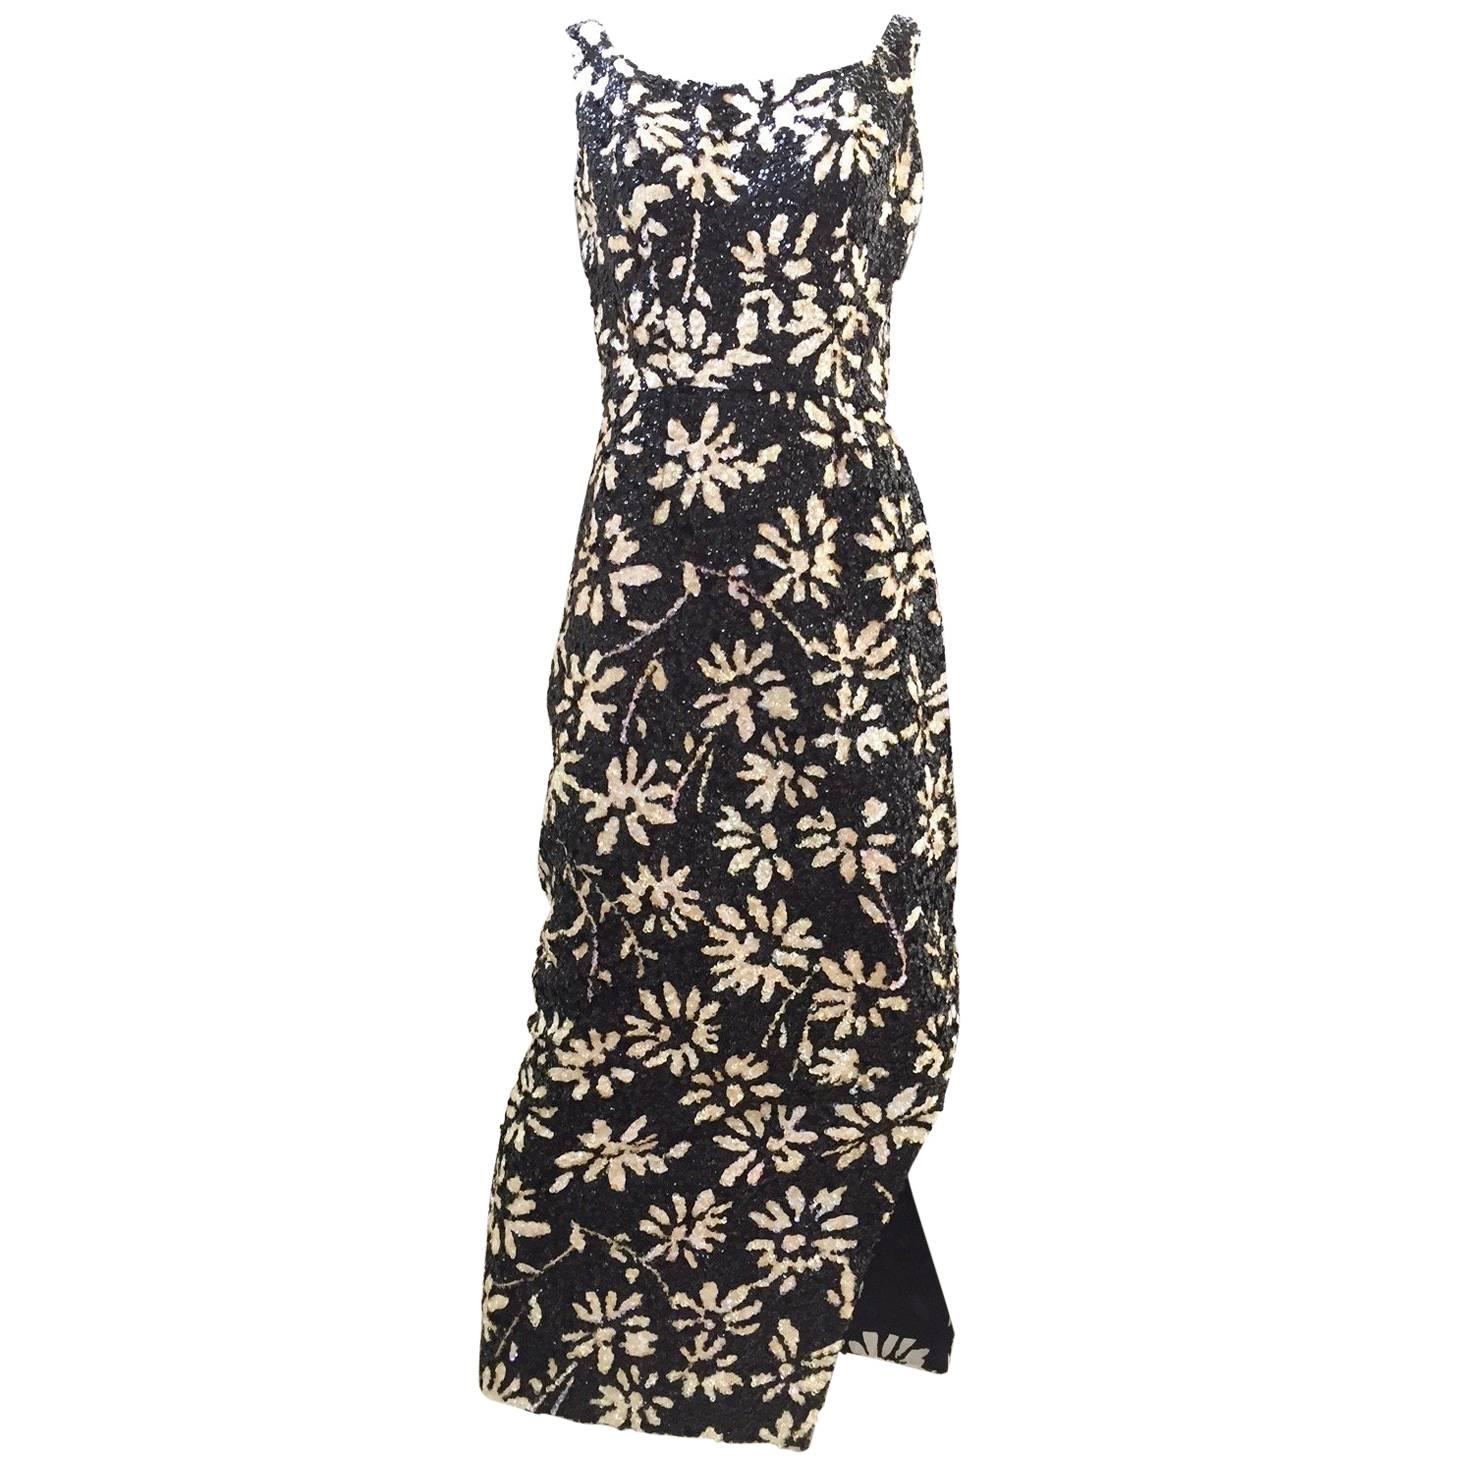 1960s Black and white floral sequin wiggle dress